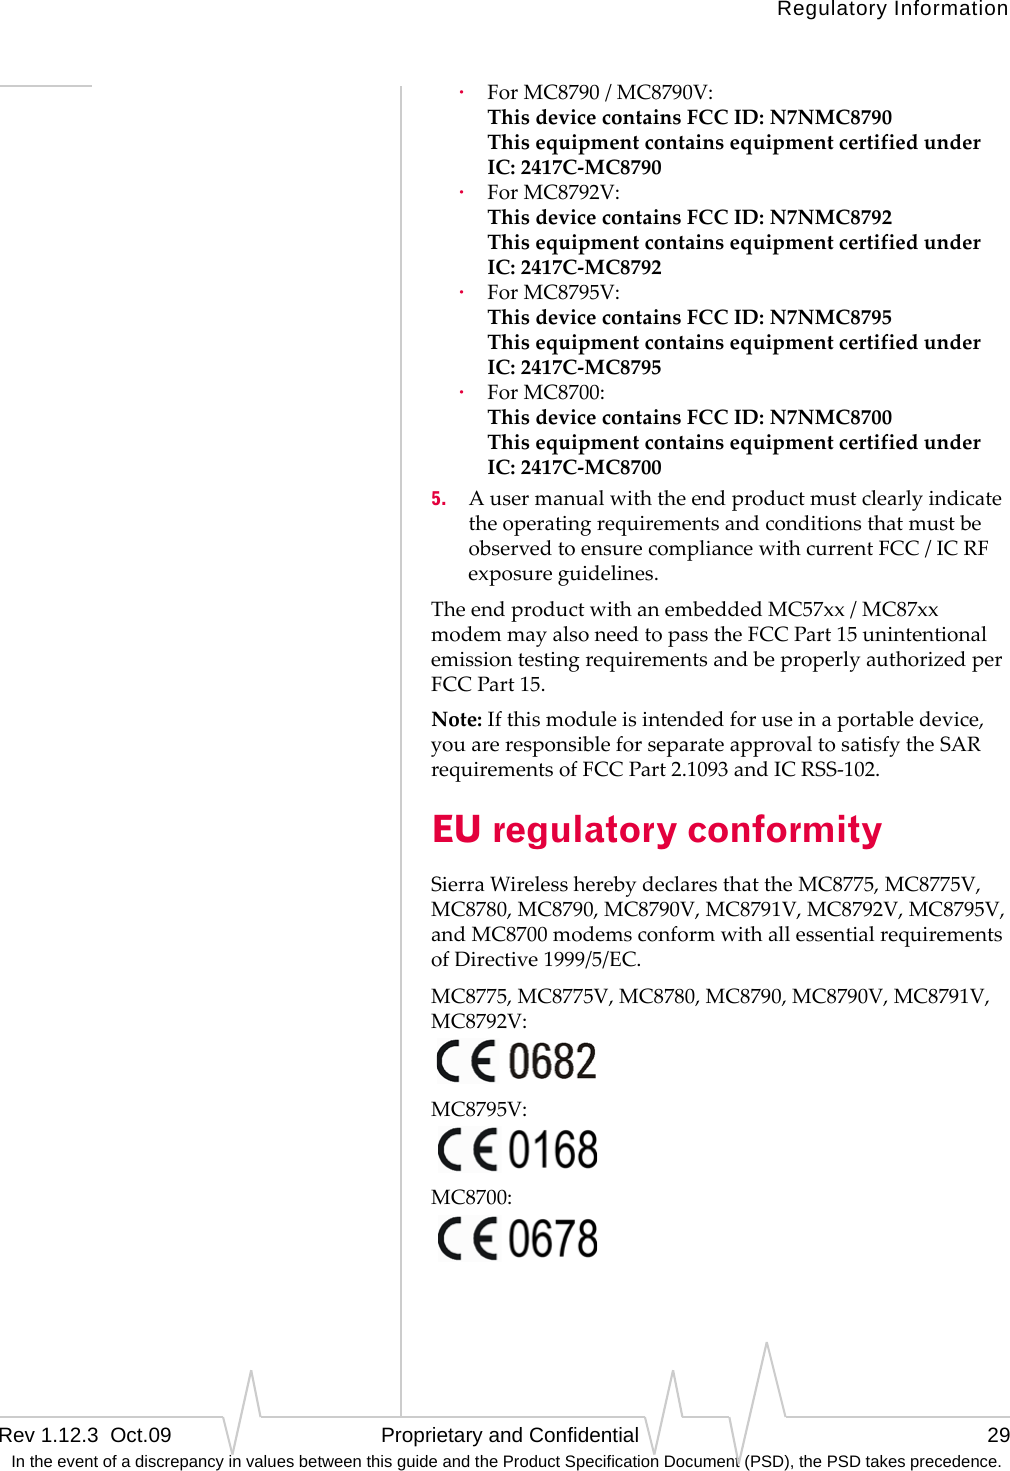 Regulatory InformationRev 1.12.3  Oct.09   Proprietary and Confidential 29 In the event of a discrepancy in values between this guide and the Product Specification Document (PSD), the PSD takes precedence.·ForMC8790/MC8790V: ThisdevicecontainsFCCID:N7NMC8790 ThisequipmentcontainsequipmentcertifiedunderIC:2417C‐MC8790·ForMC8792V: ThisdevicecontainsFCCID:N7NMC8792 ThisequipmentcontainsequipmentcertifiedunderIC:2417C‐MC8792·ForMC8795V: ThisdevicecontainsFCCID:N7NMC8795 ThisequipmentcontainsequipmentcertifiedunderIC:2417C‐MC8795·ForMC8700: ThisdevicecontainsFCCID:N7NMC8700 ThisequipmentcontainsequipmentcertifiedunderIC:2417C‐MC87005. AusermanualwiththeendproductmustclearlyindicatetheoperatingrequirementsandconditionsthatmustbeobservedtoensurecompliancewithcurrentFCC/ICRFexposureguidelines.TheendproductwithanembeddedMC57xx/MC87xxmodemmayalsoneedtopasstheFCCPart15unintentionalemissiontestingrequirementsandbeproperlyauthorizedperFCCPart15.Note:Ifthismoduleisintendedforuseinaportabledevice,youareresponsibleforseparateapprovaltosatisfytheSARrequirementsofFCCPart2.1093andICRSS‐102.EU regulatory conformitySierraWirelessherebydeclaresthattheMC8775,MC8775V,MC8780,MC8790,MC8790V,MC8791V,MC8792V,MC8795V,andMC8700modemsconformwithallessentialrequirementsofDirective1999/5/EC.MC8775,MC8775V,MC8780,MC8790,MC8790V,MC8791V,MC8792V:MC8795V:MC8700: